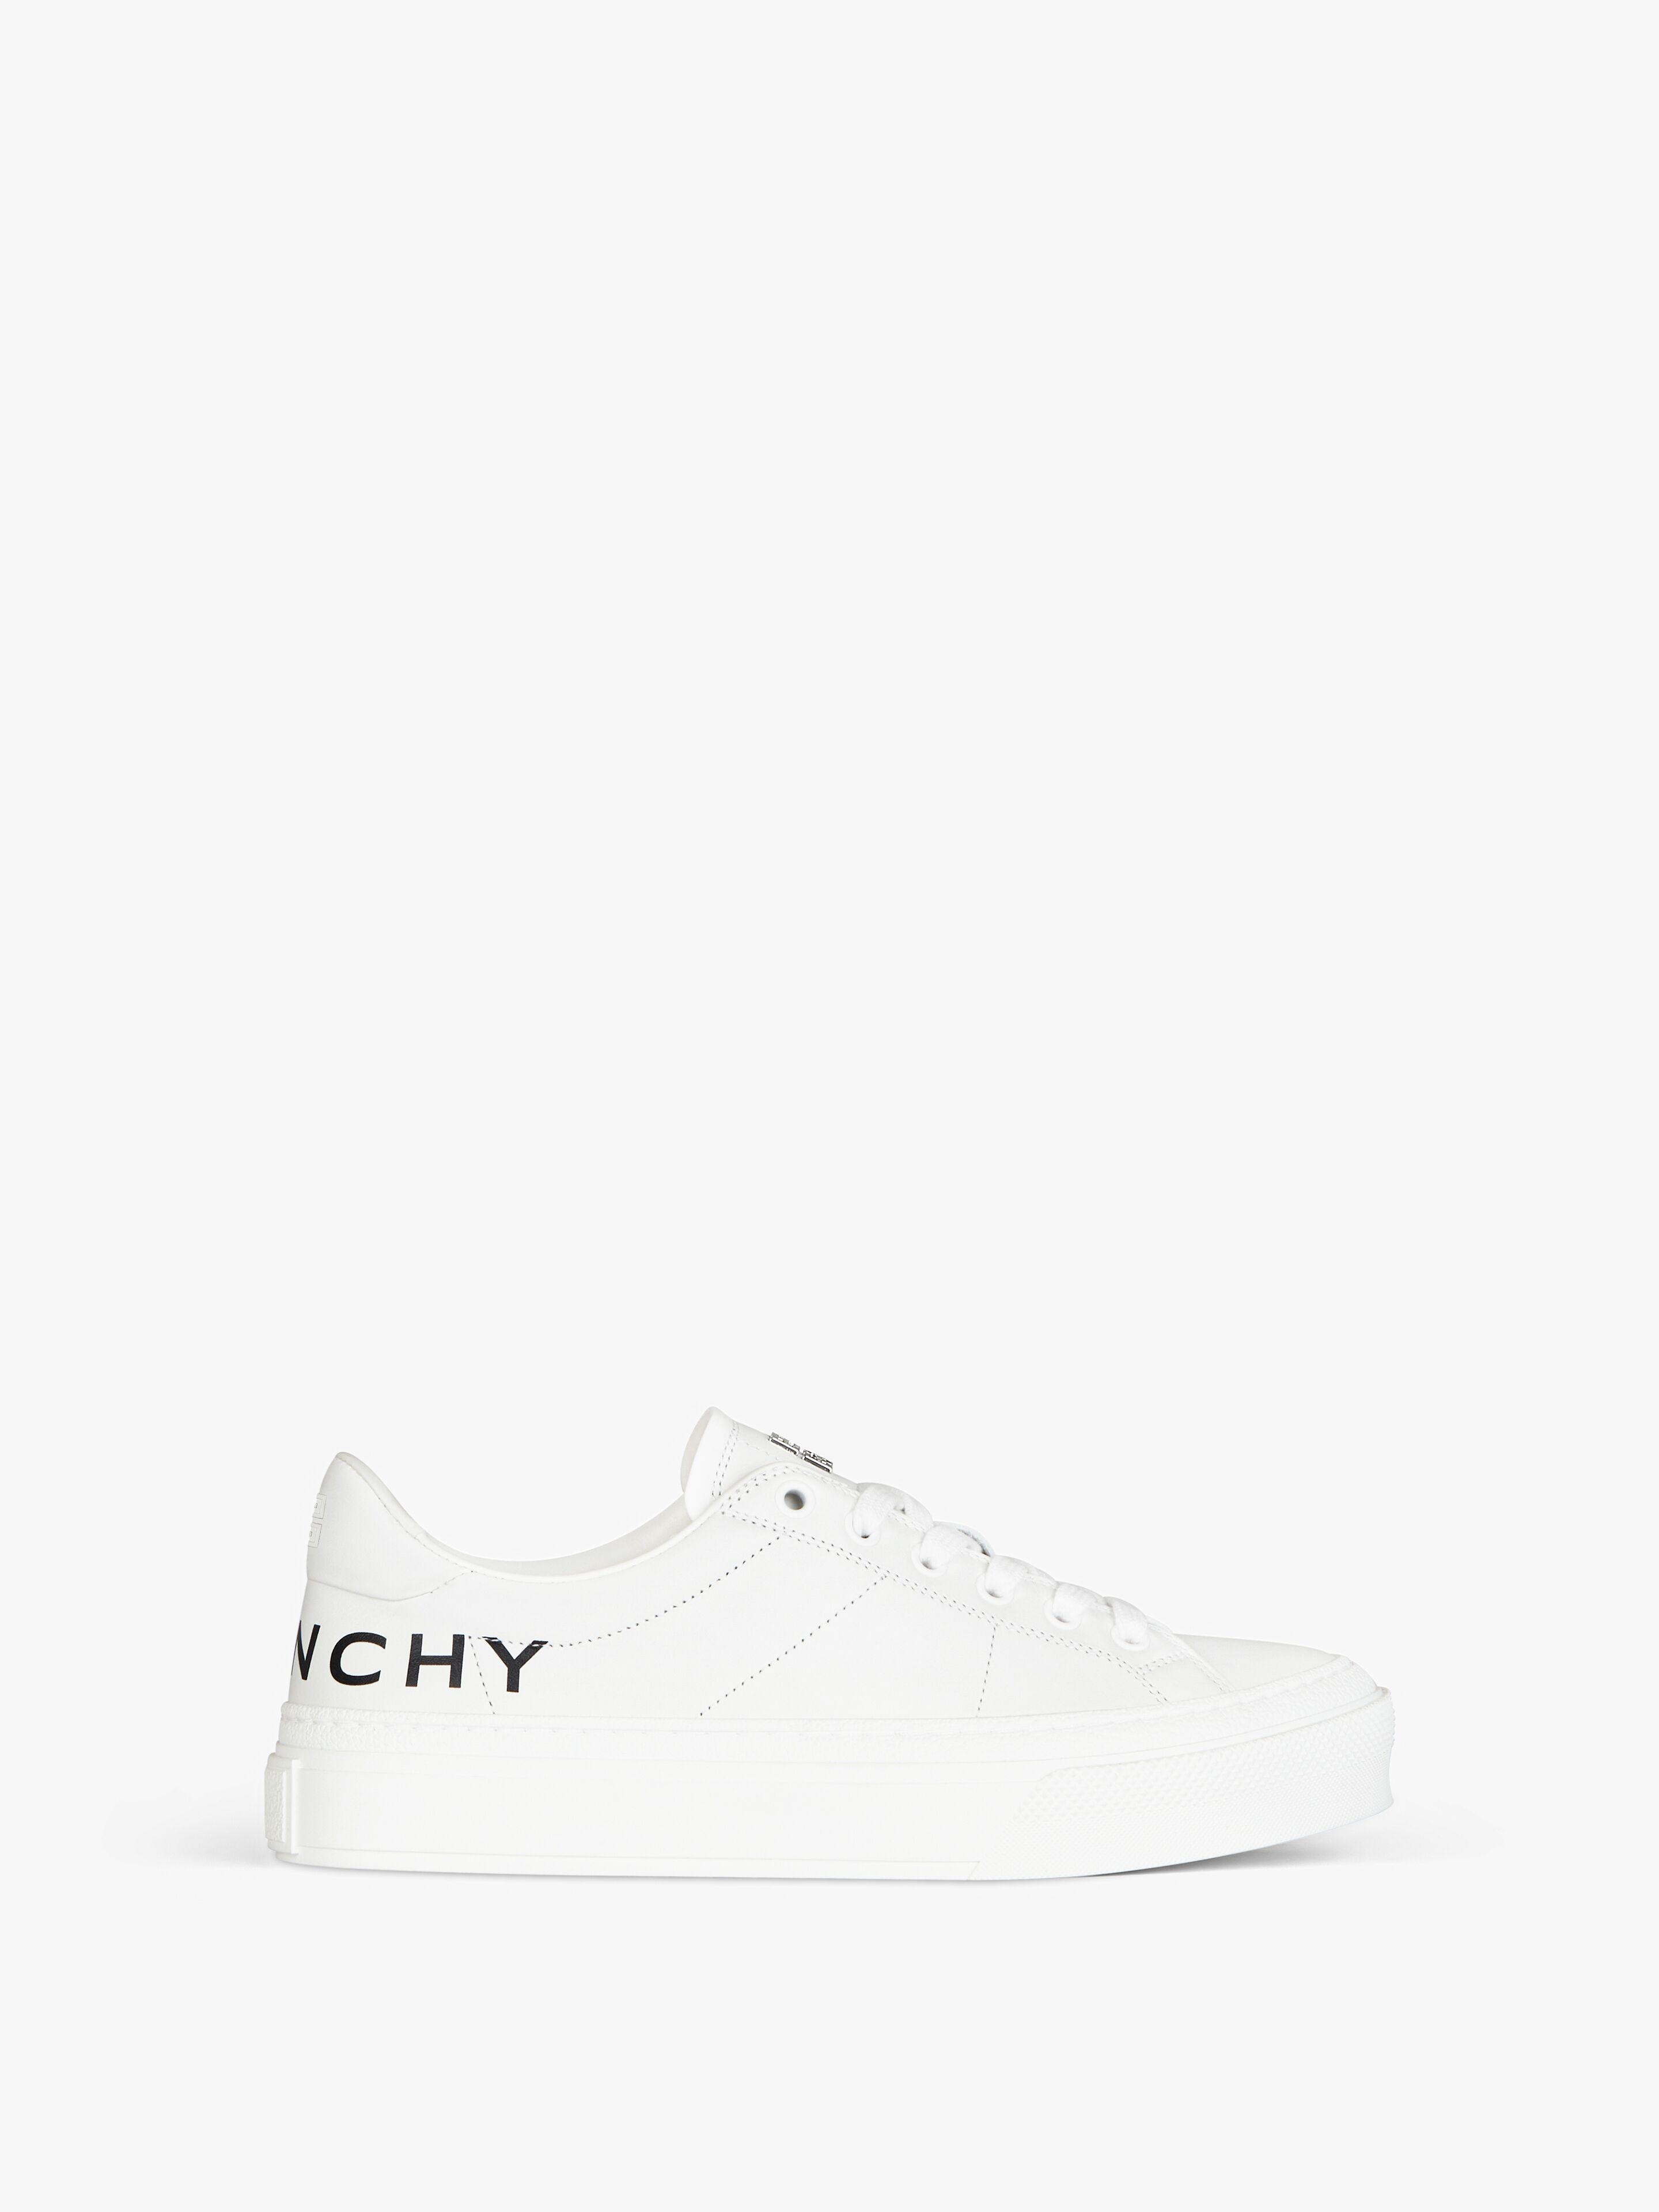 GIVENCHY CITY SPORT SNEAKERS IN LEATHER - 1